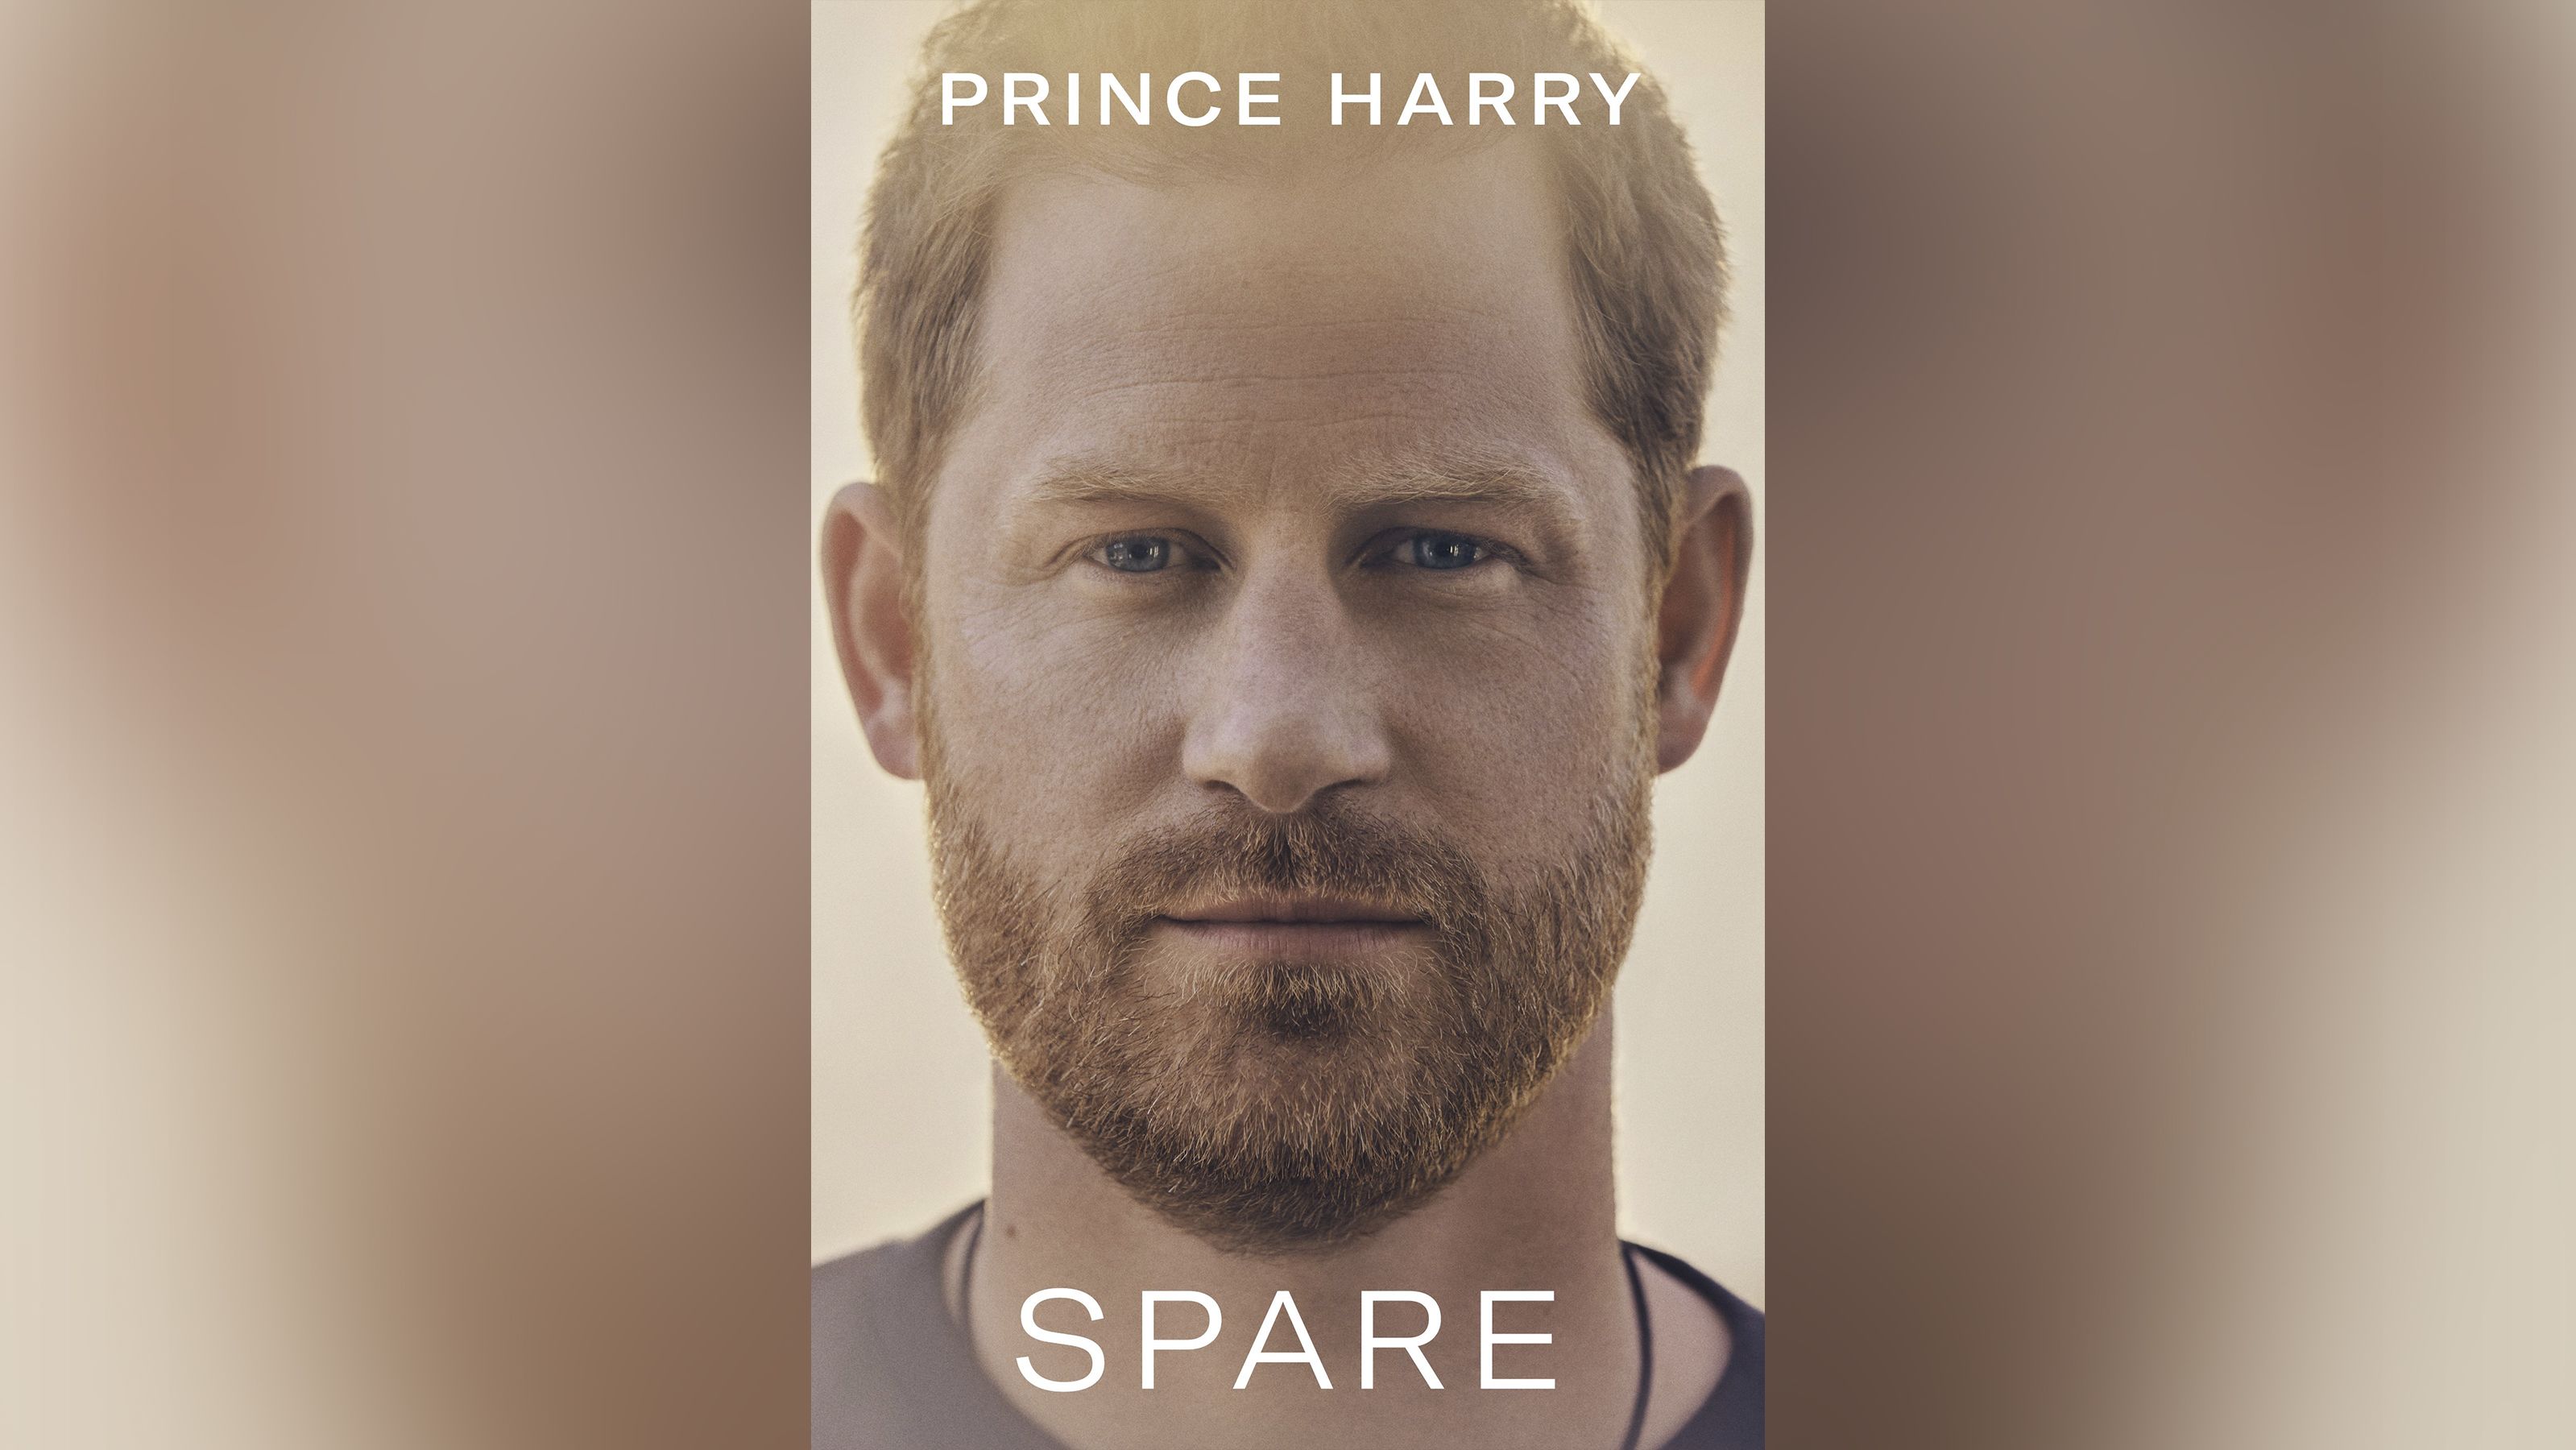 Prince Harry's memoir 'Spare' will be published on January 10, 2023.